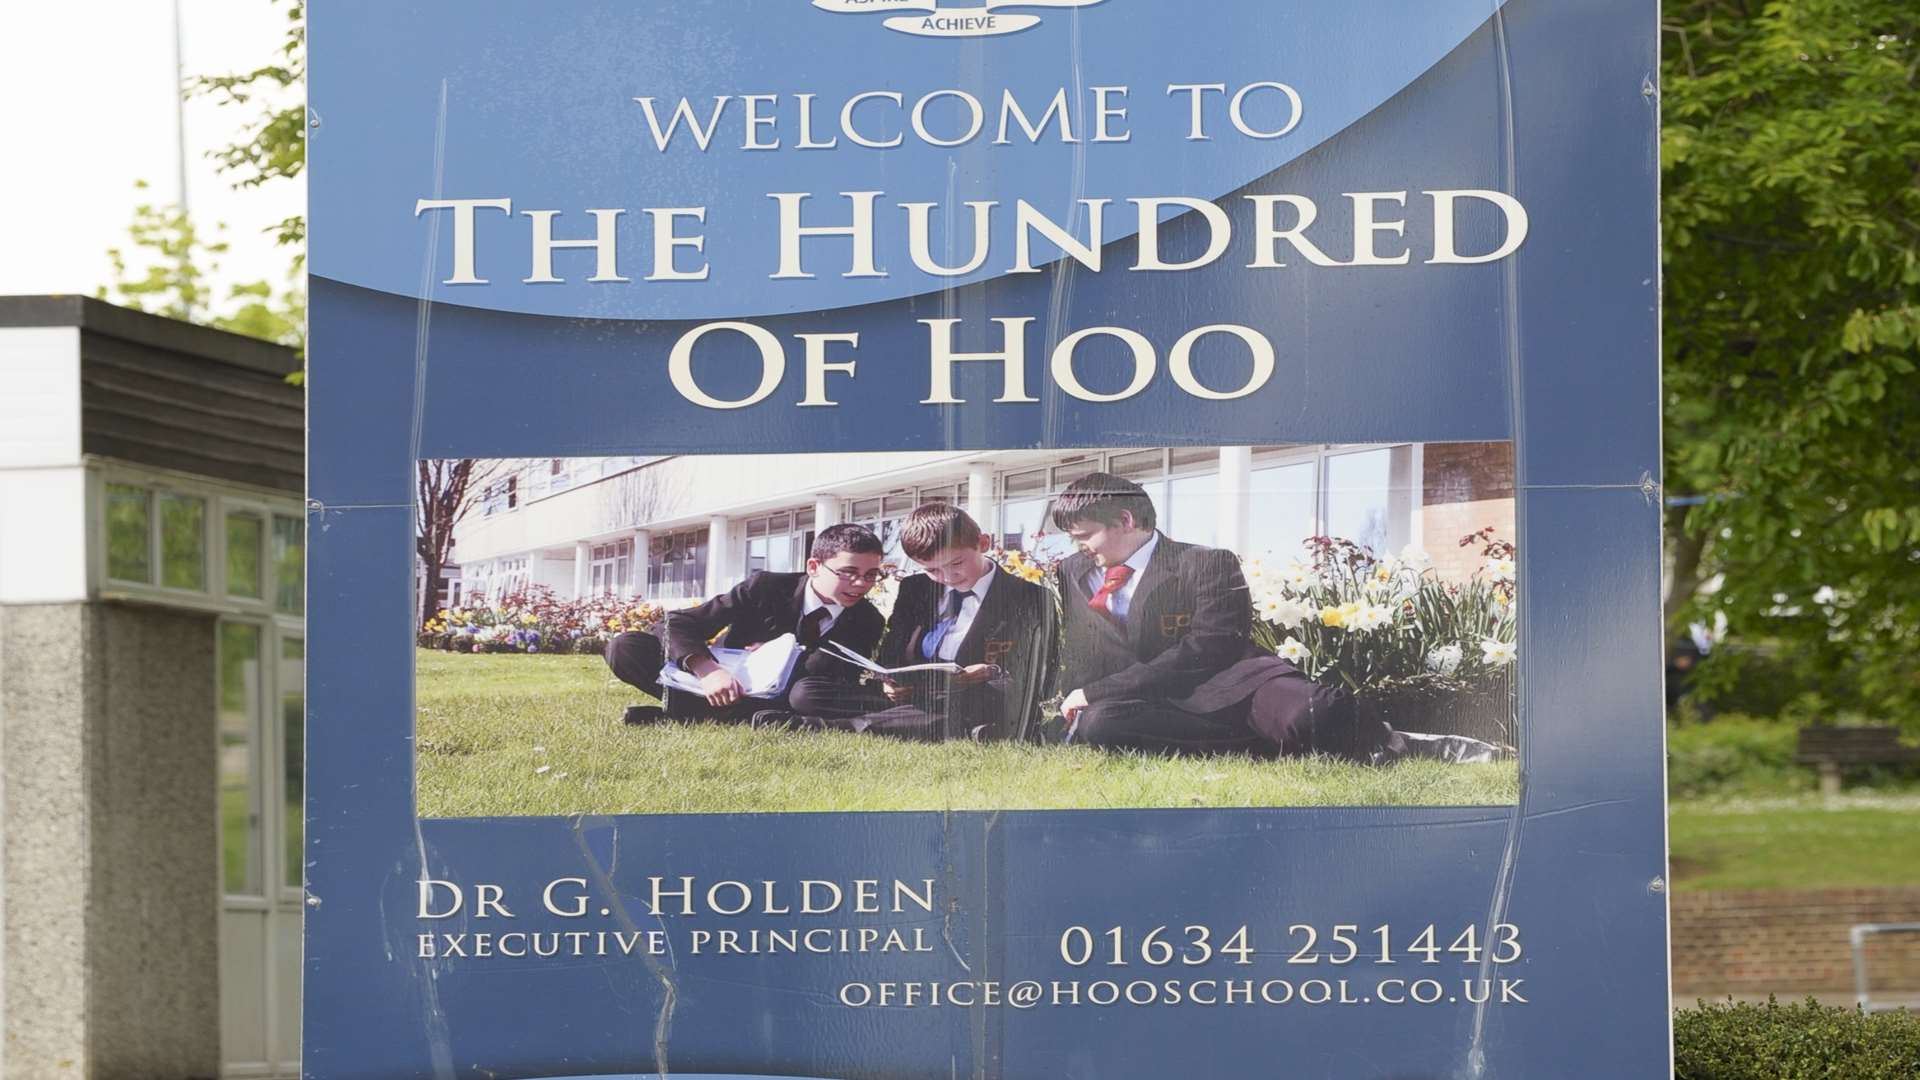 Gary Vyse was in charge of the Hundred of Hoo school